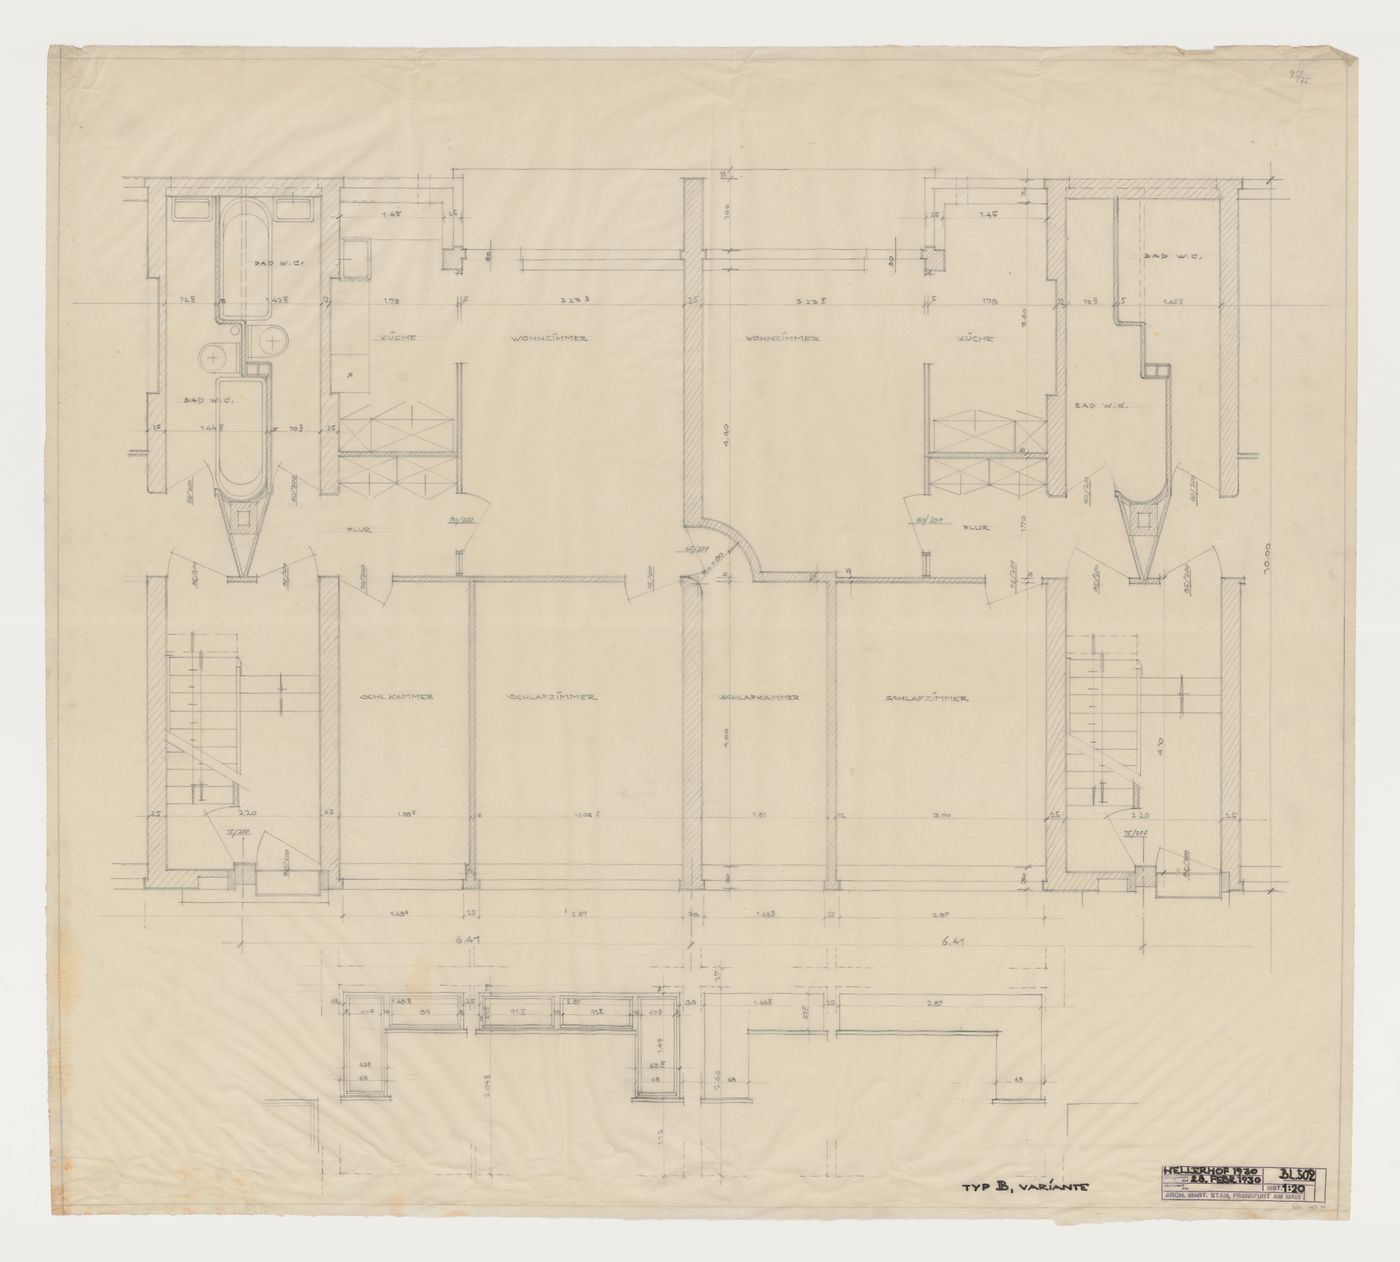 Ground floor plan and elevation for windows for a type A housing unit, Hellerhof Housing Estate, Frankfurt am Main, Germany